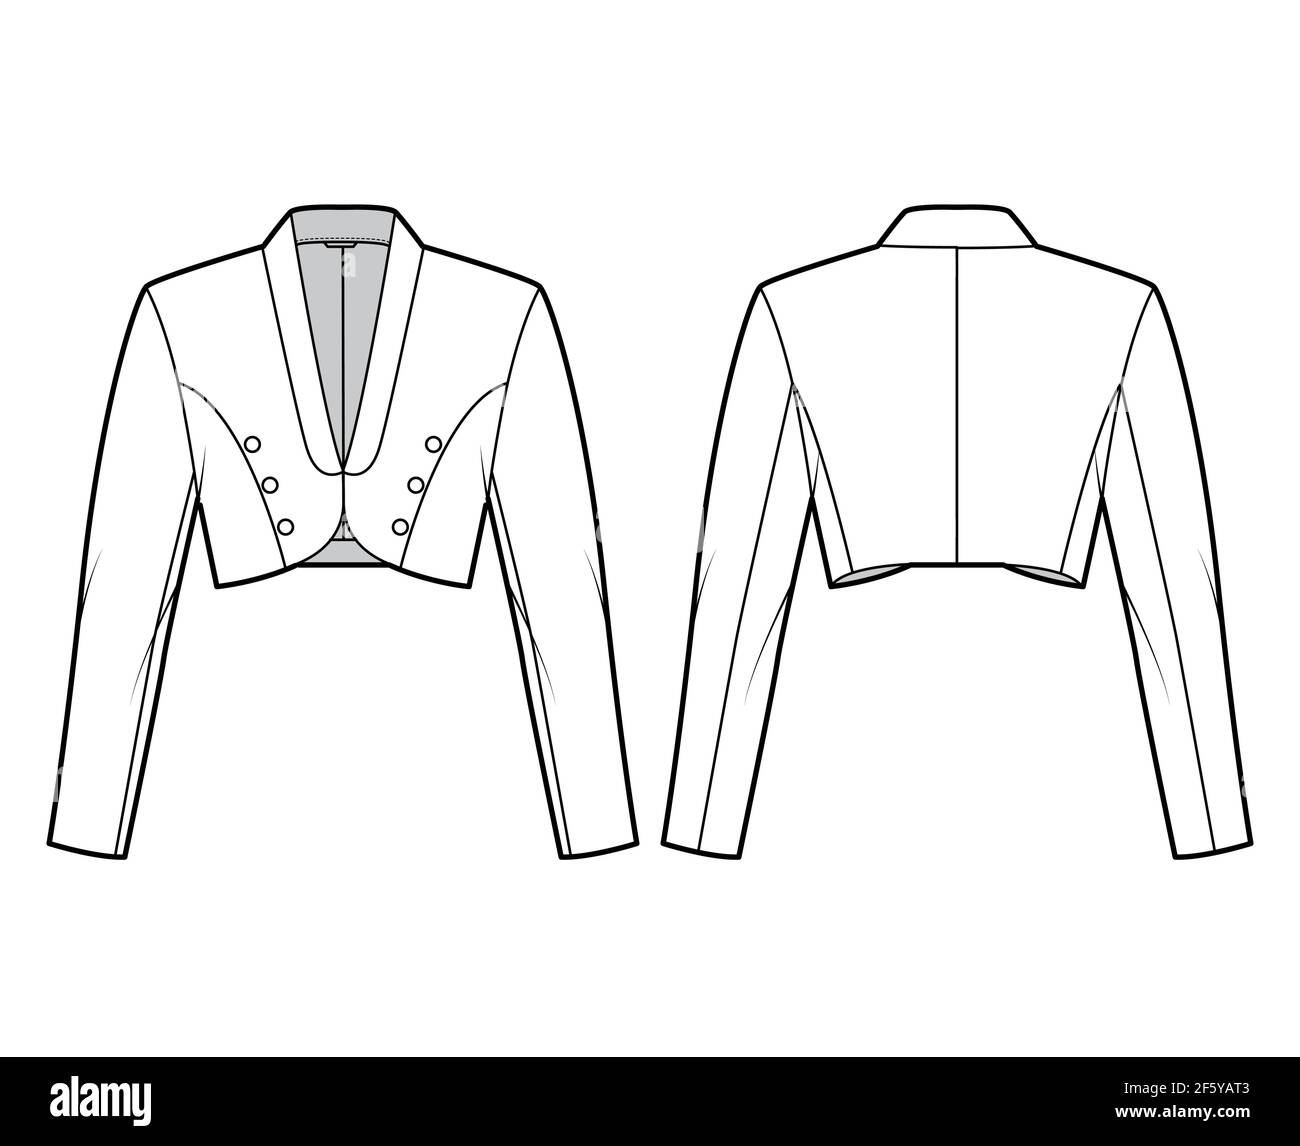 Bolero jacket technical fashion illustration with crop waist length, long  sleeves, shawl collar, button closure. Flat blazer template front, back,  white color style. Women, men, unisex top CAD mockup Stock Vector Image